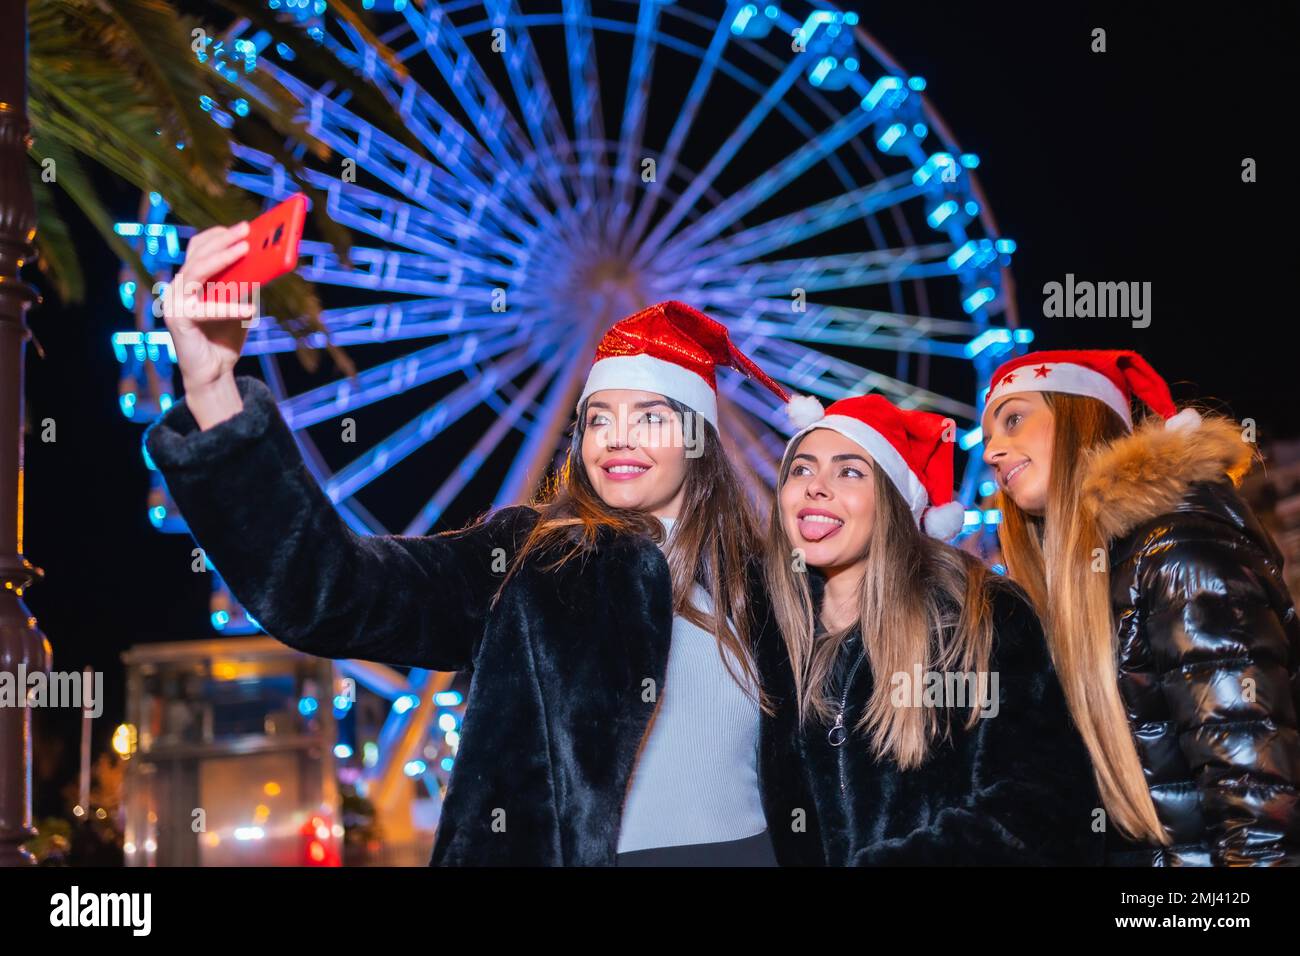 Christmas in the city at night, decoration in winter. Friends on an illuminated Ferris wheel taking a selfie with the phone Stock Photo